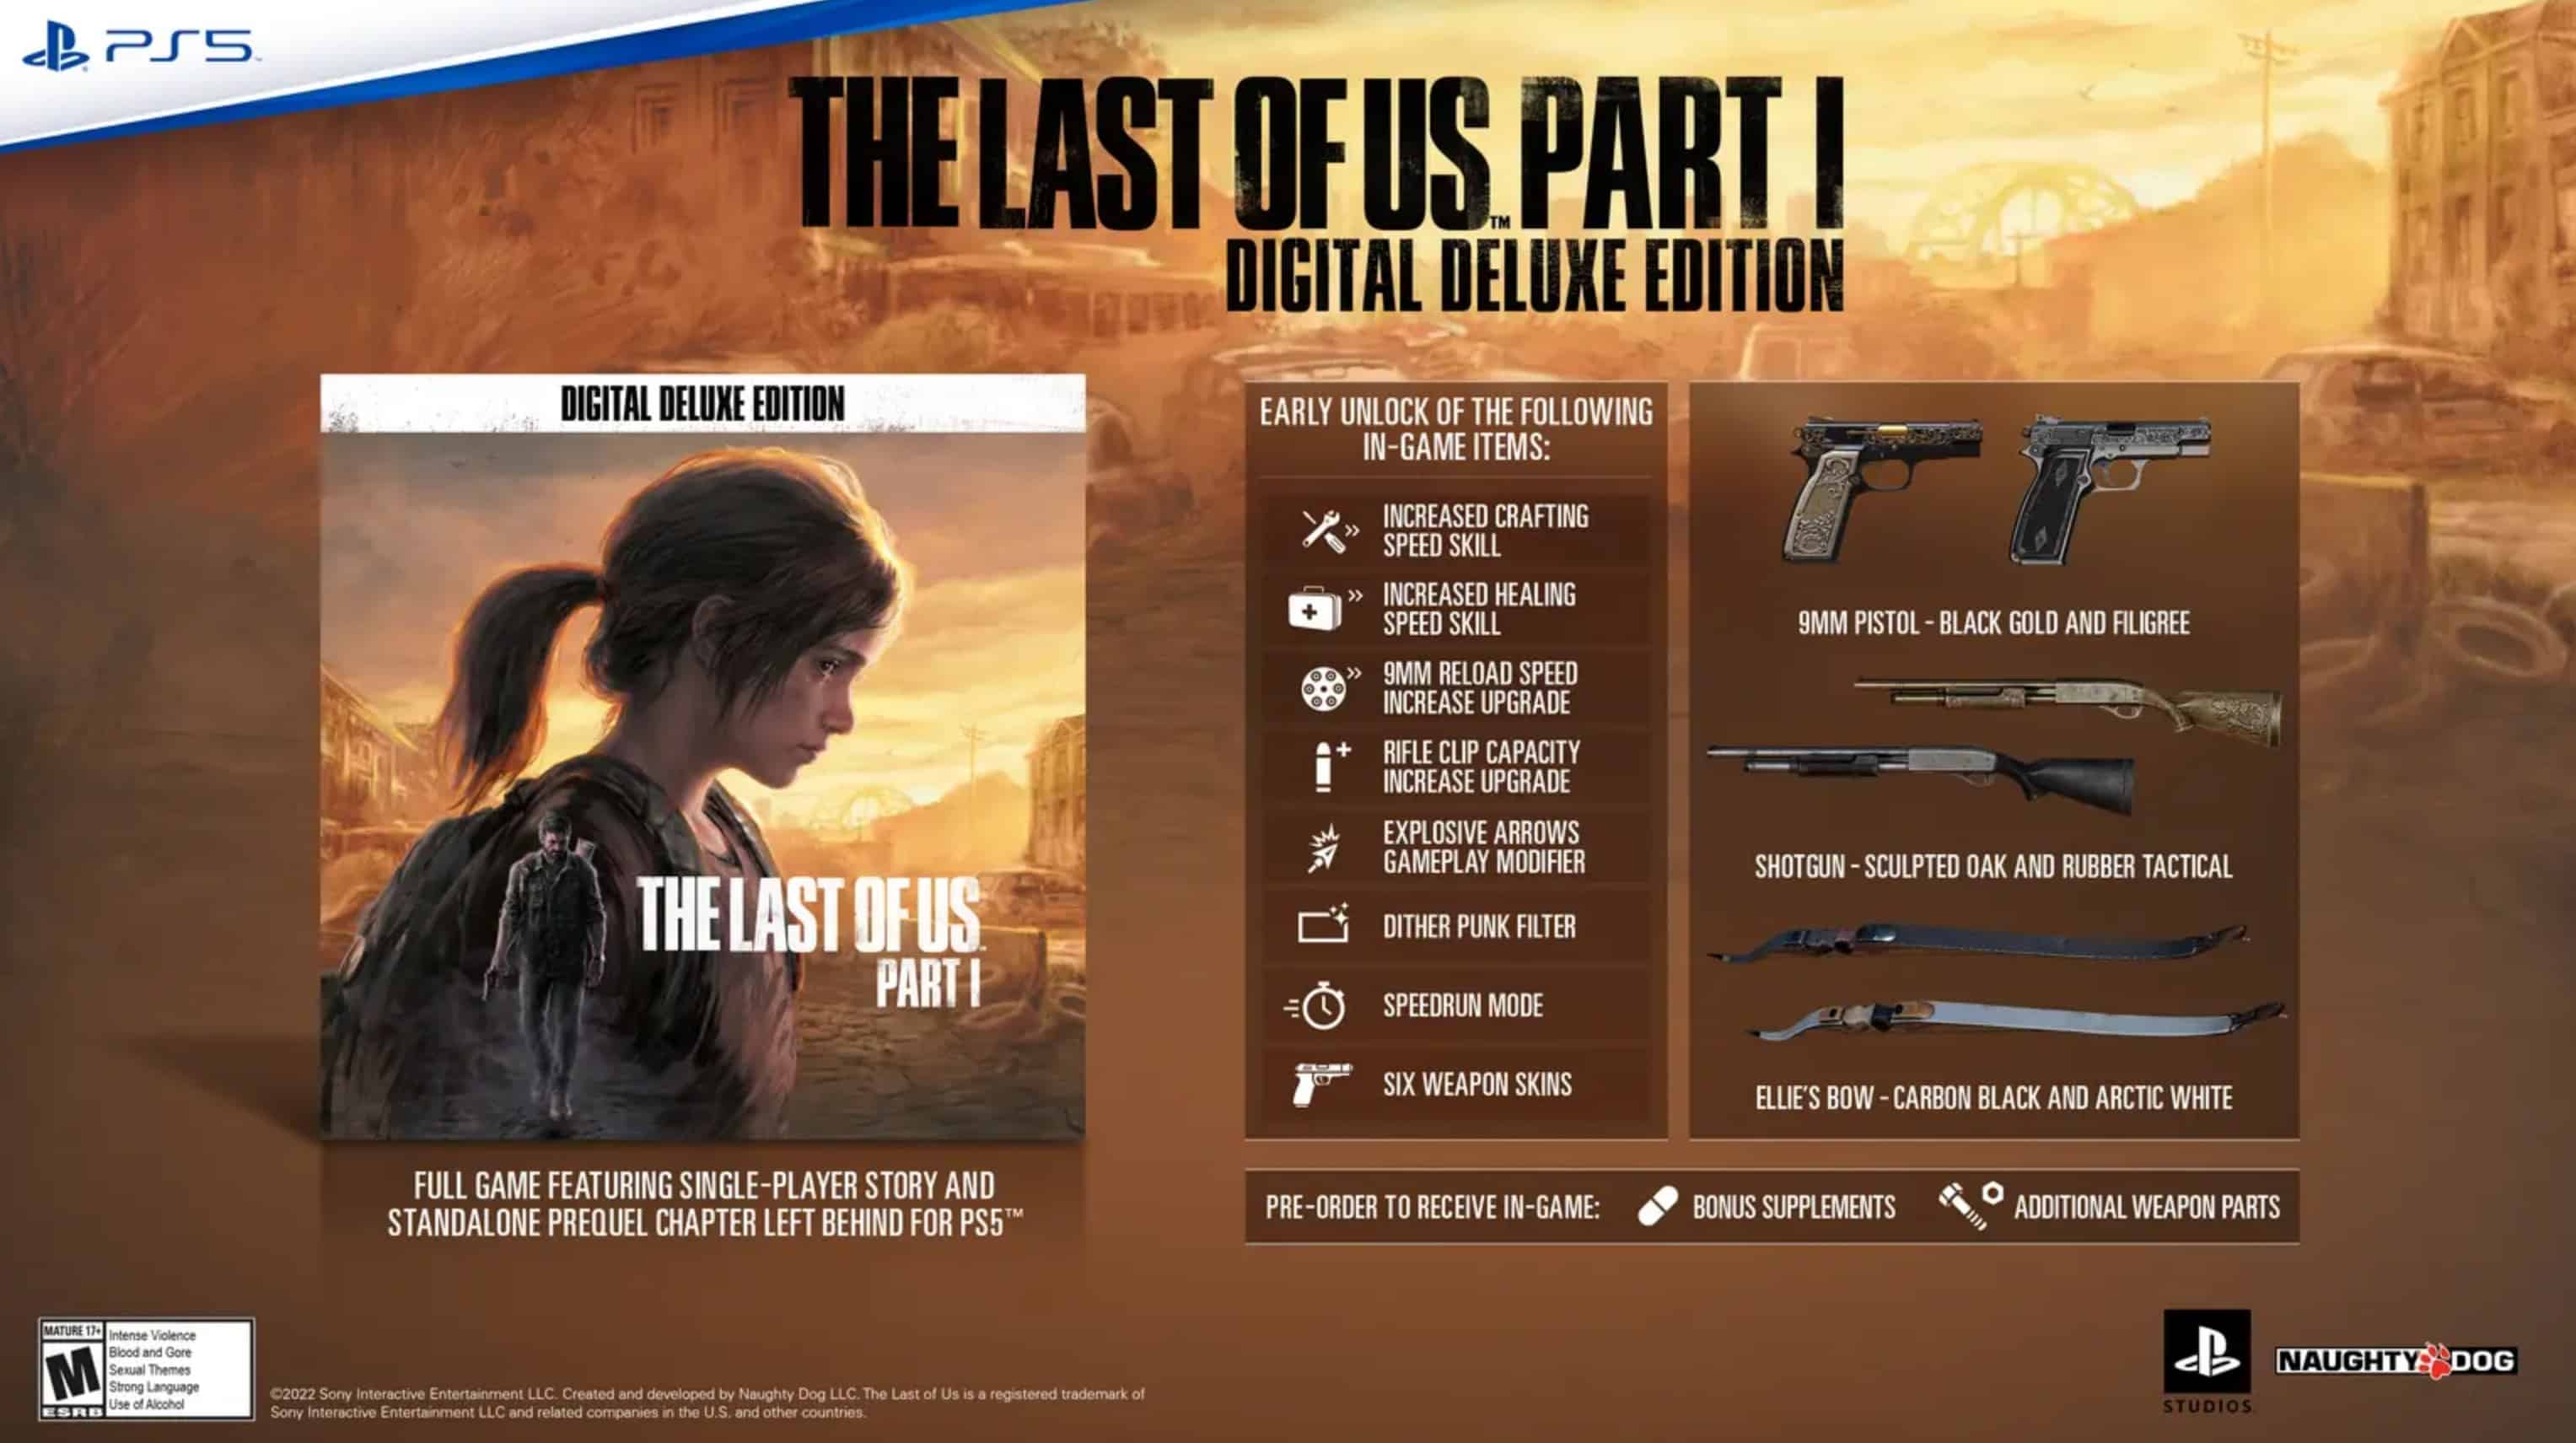 The last of us Part 1 remake digital deluxe edition